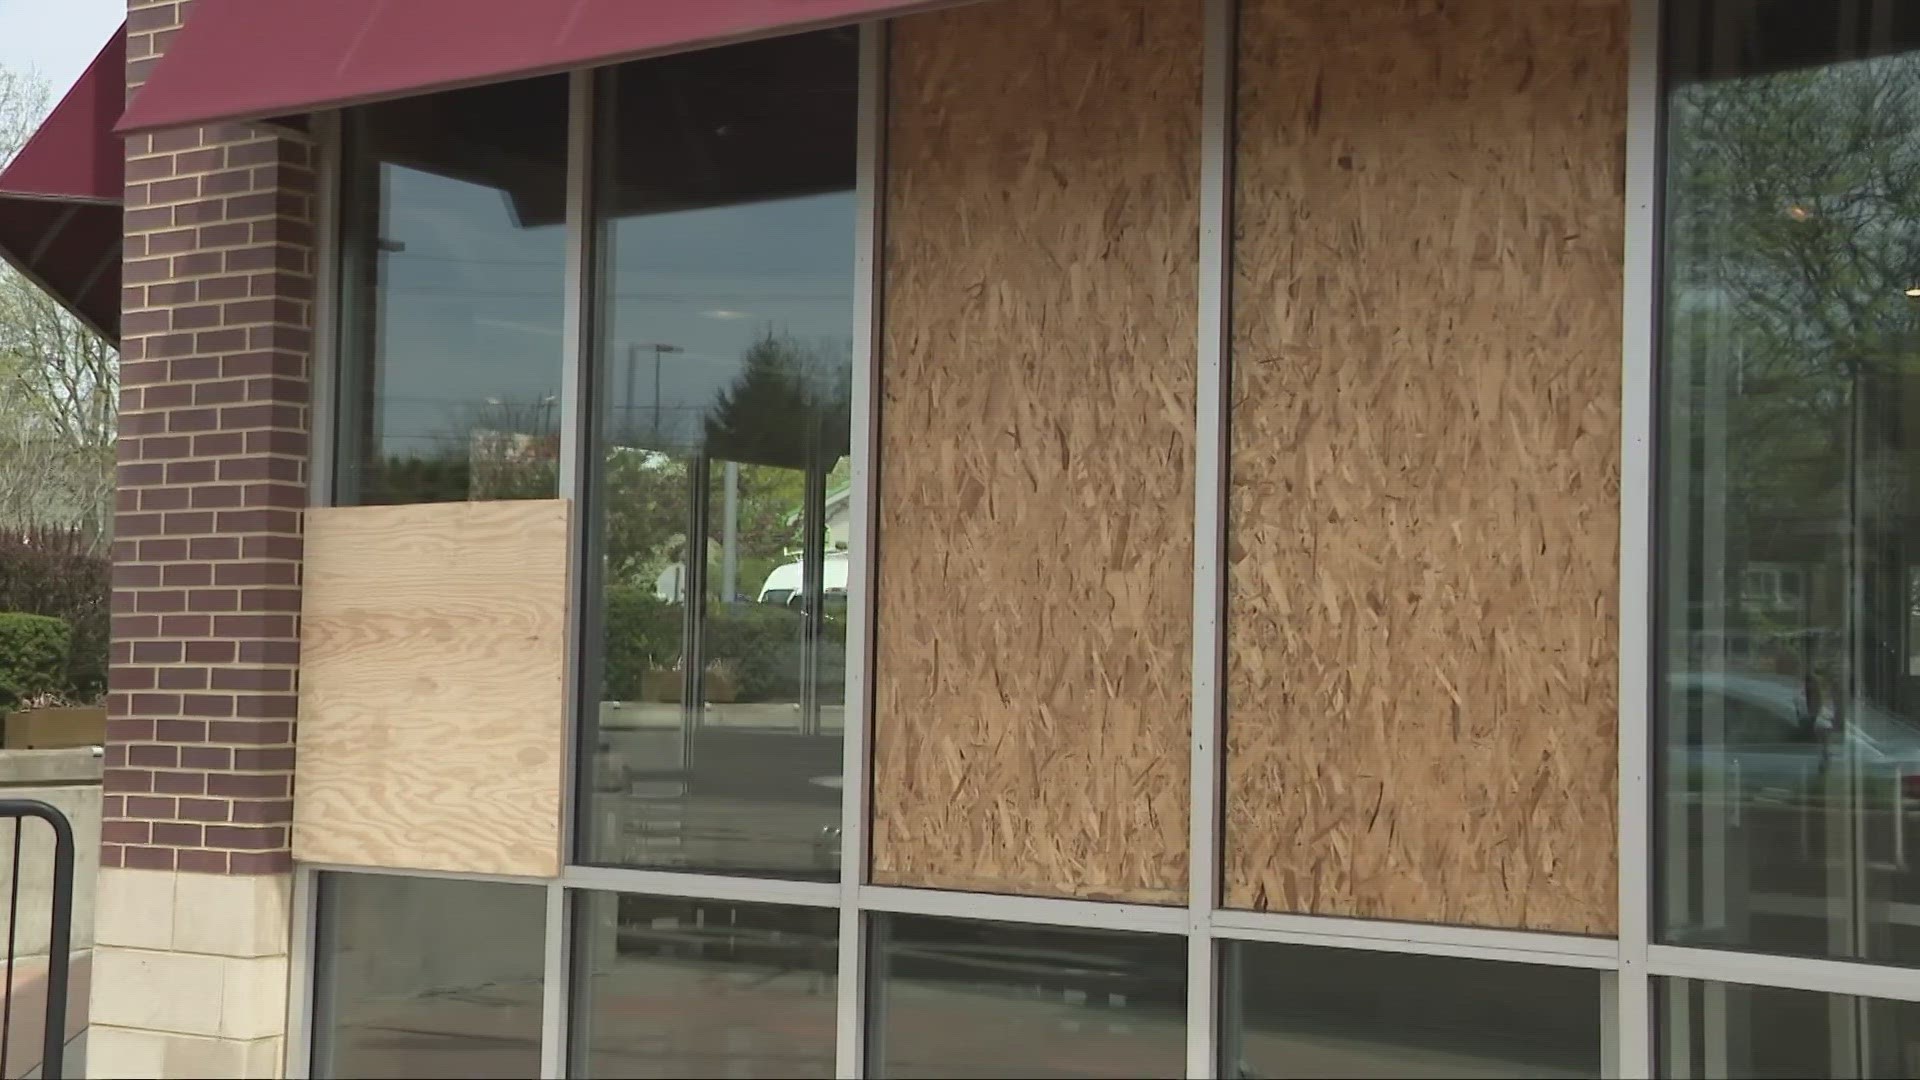 Thrown objects during Wednesday night's protest smashed in windows at Wally Waffle, Irie Jamaican Kitchen, and Chipotle.